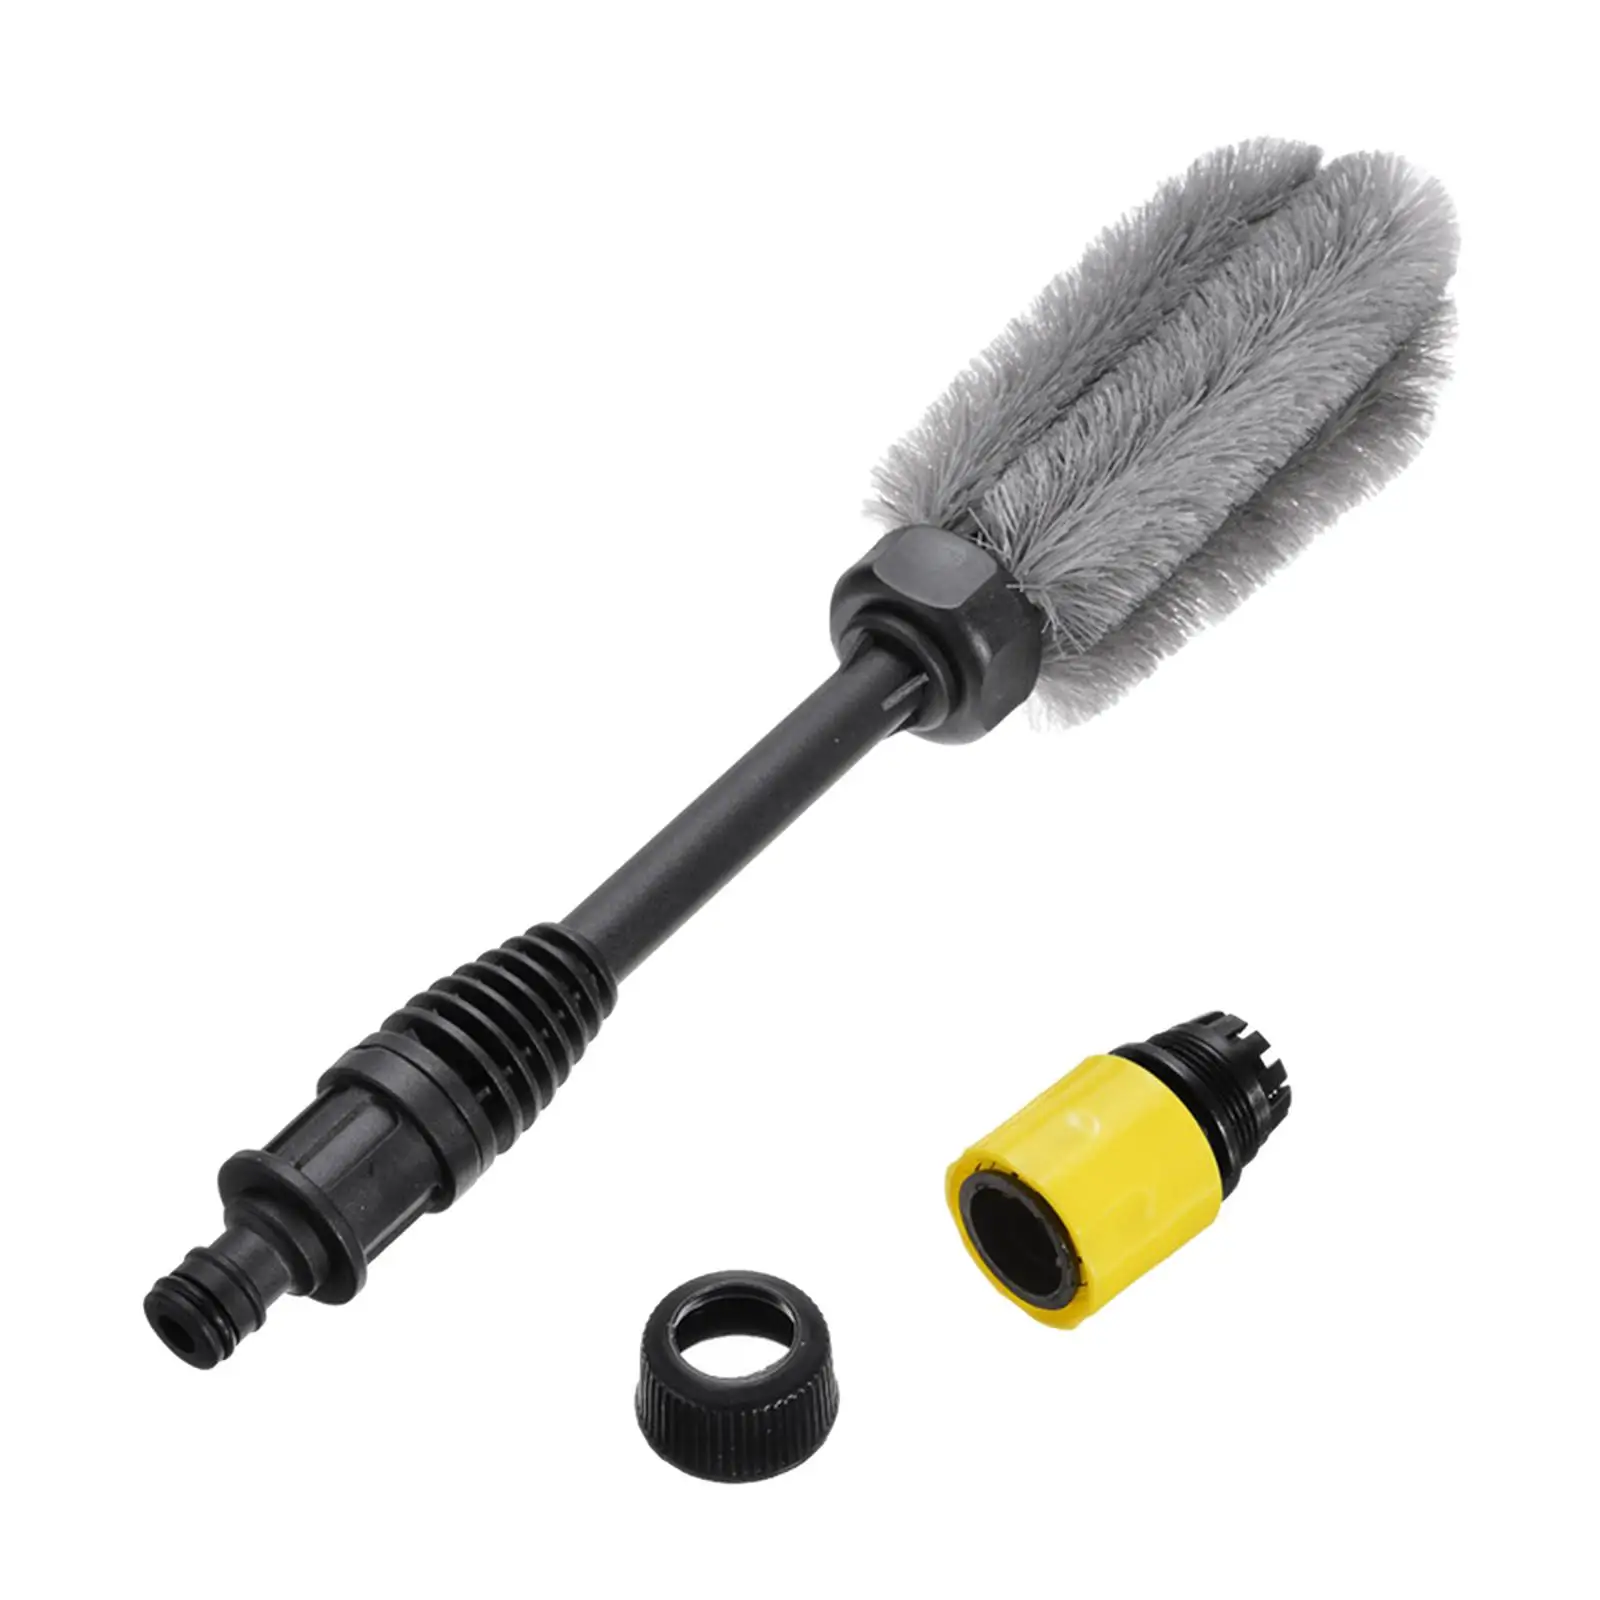 High-Pressure Soft Washing Brush Soft Bristle Scratch?Free Fits for Cars